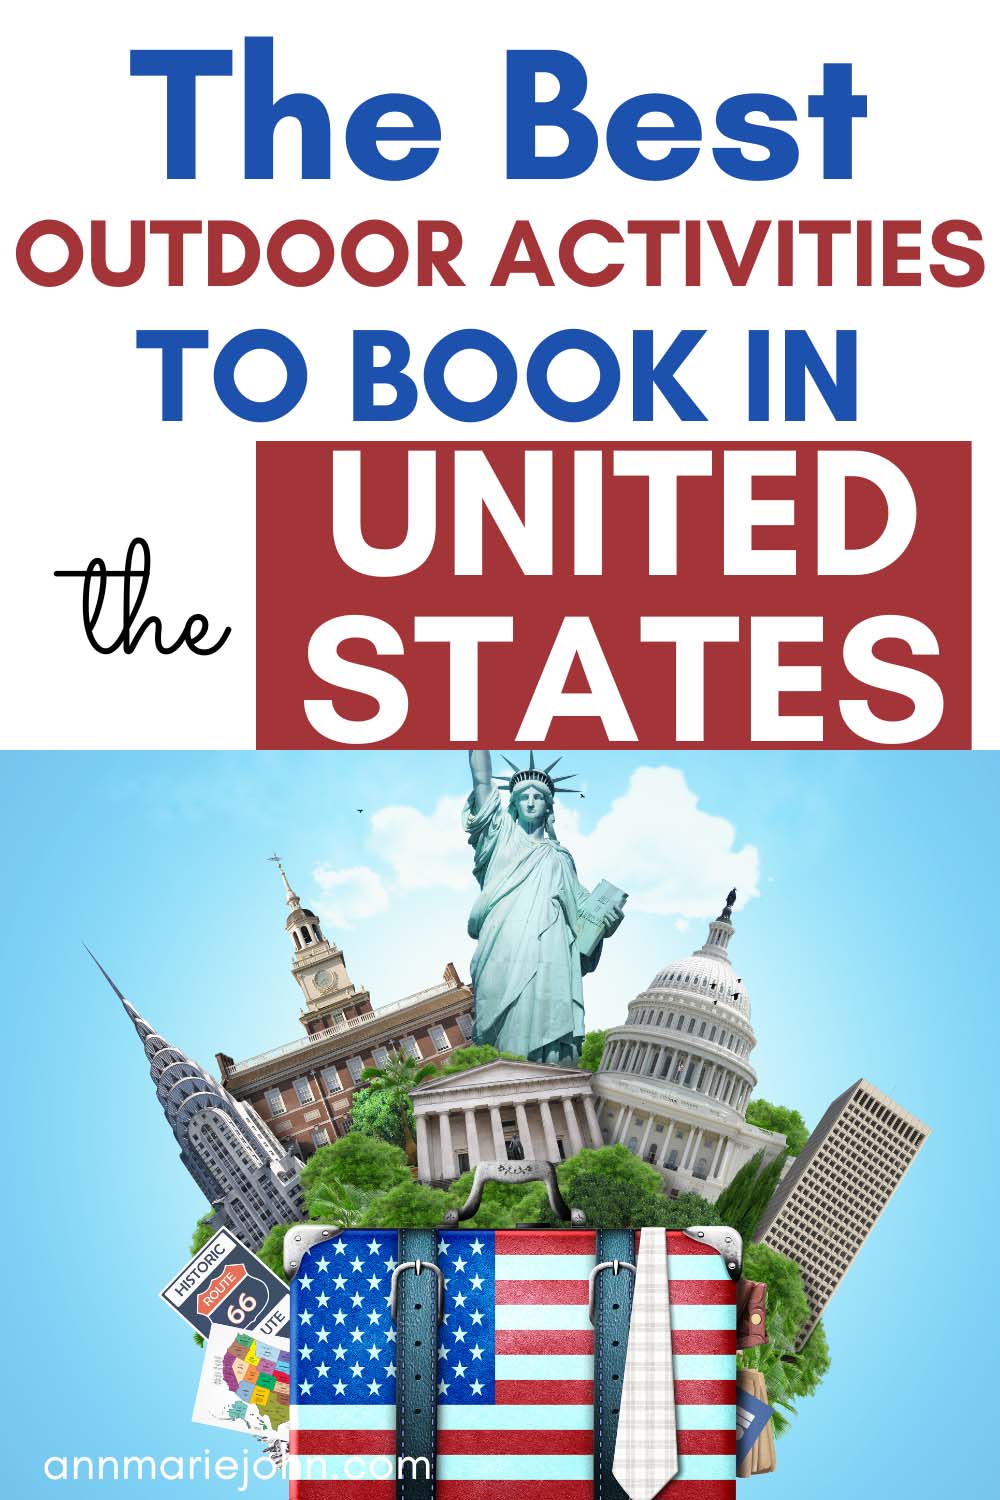 The Best Activities To Book in the United States